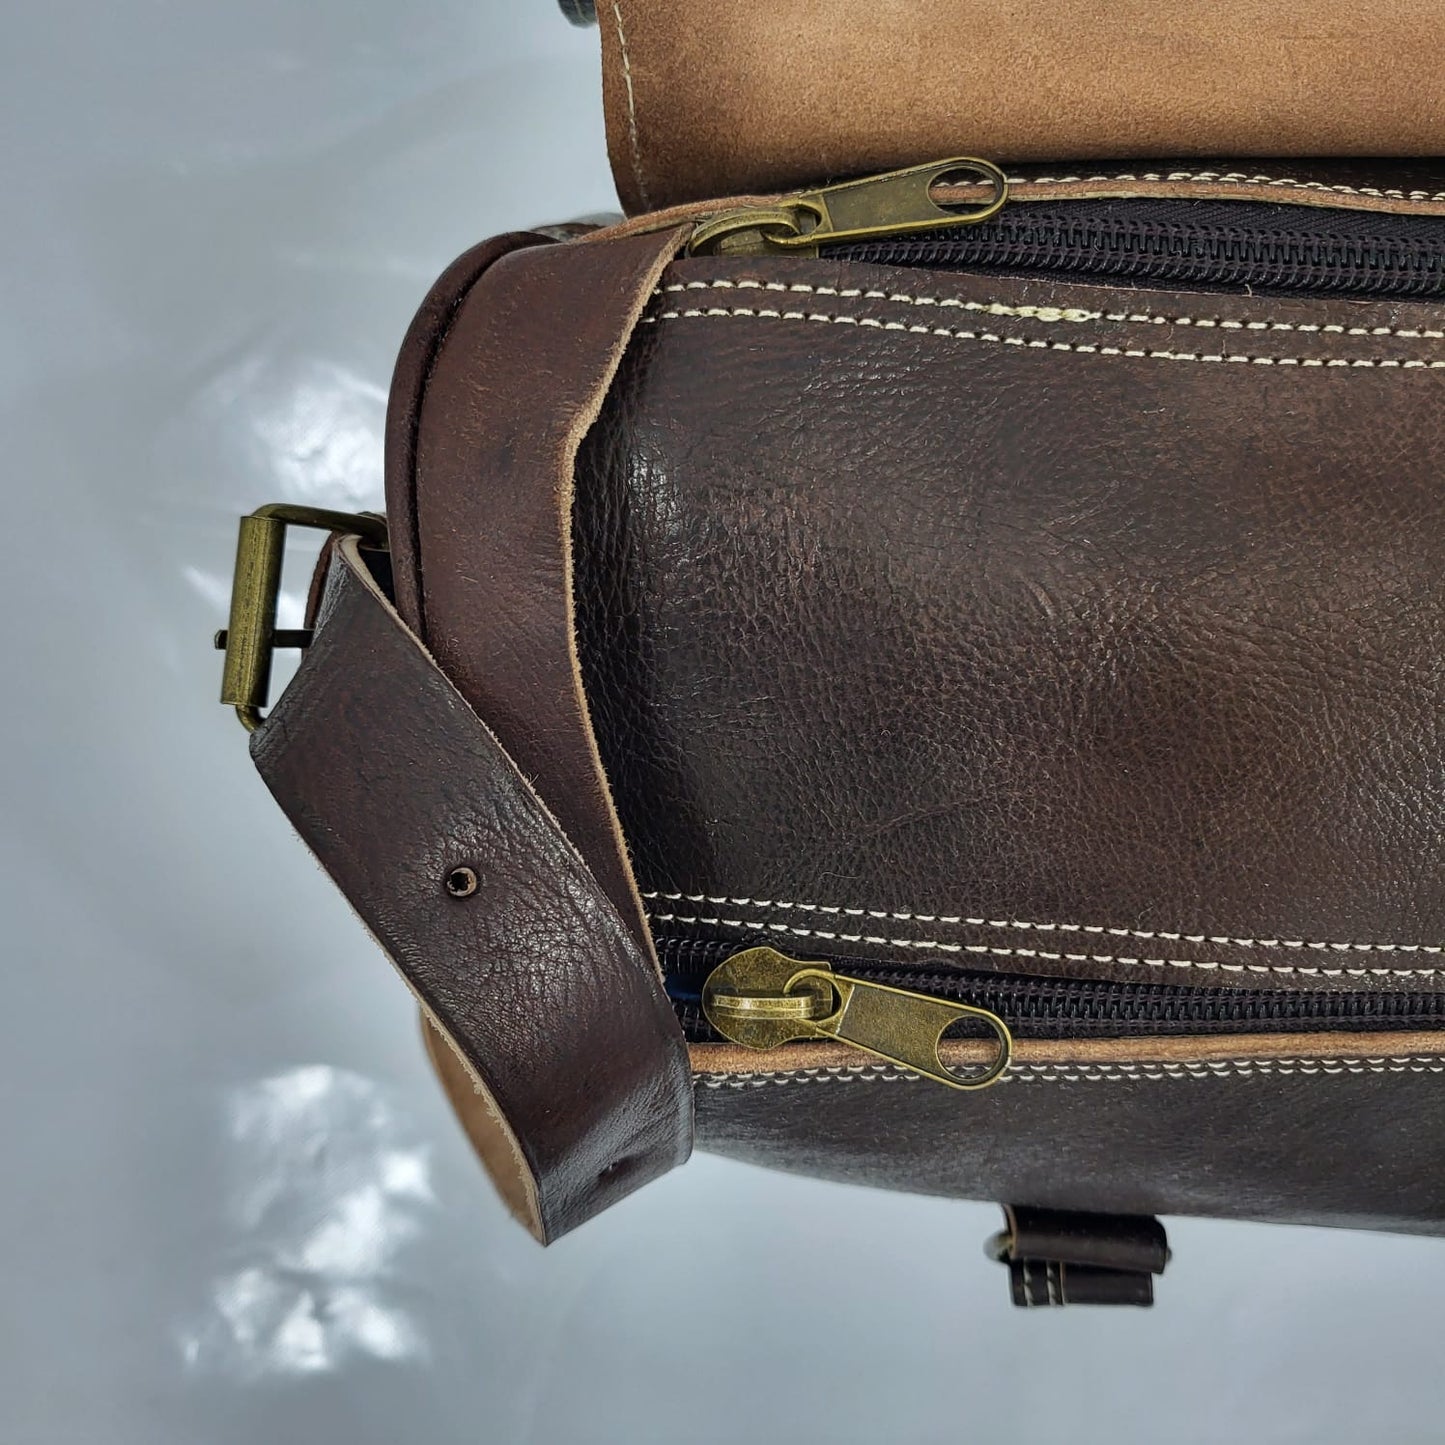 Explore Our Handmade Moroccan Leather Travel Bag for Discerning Men